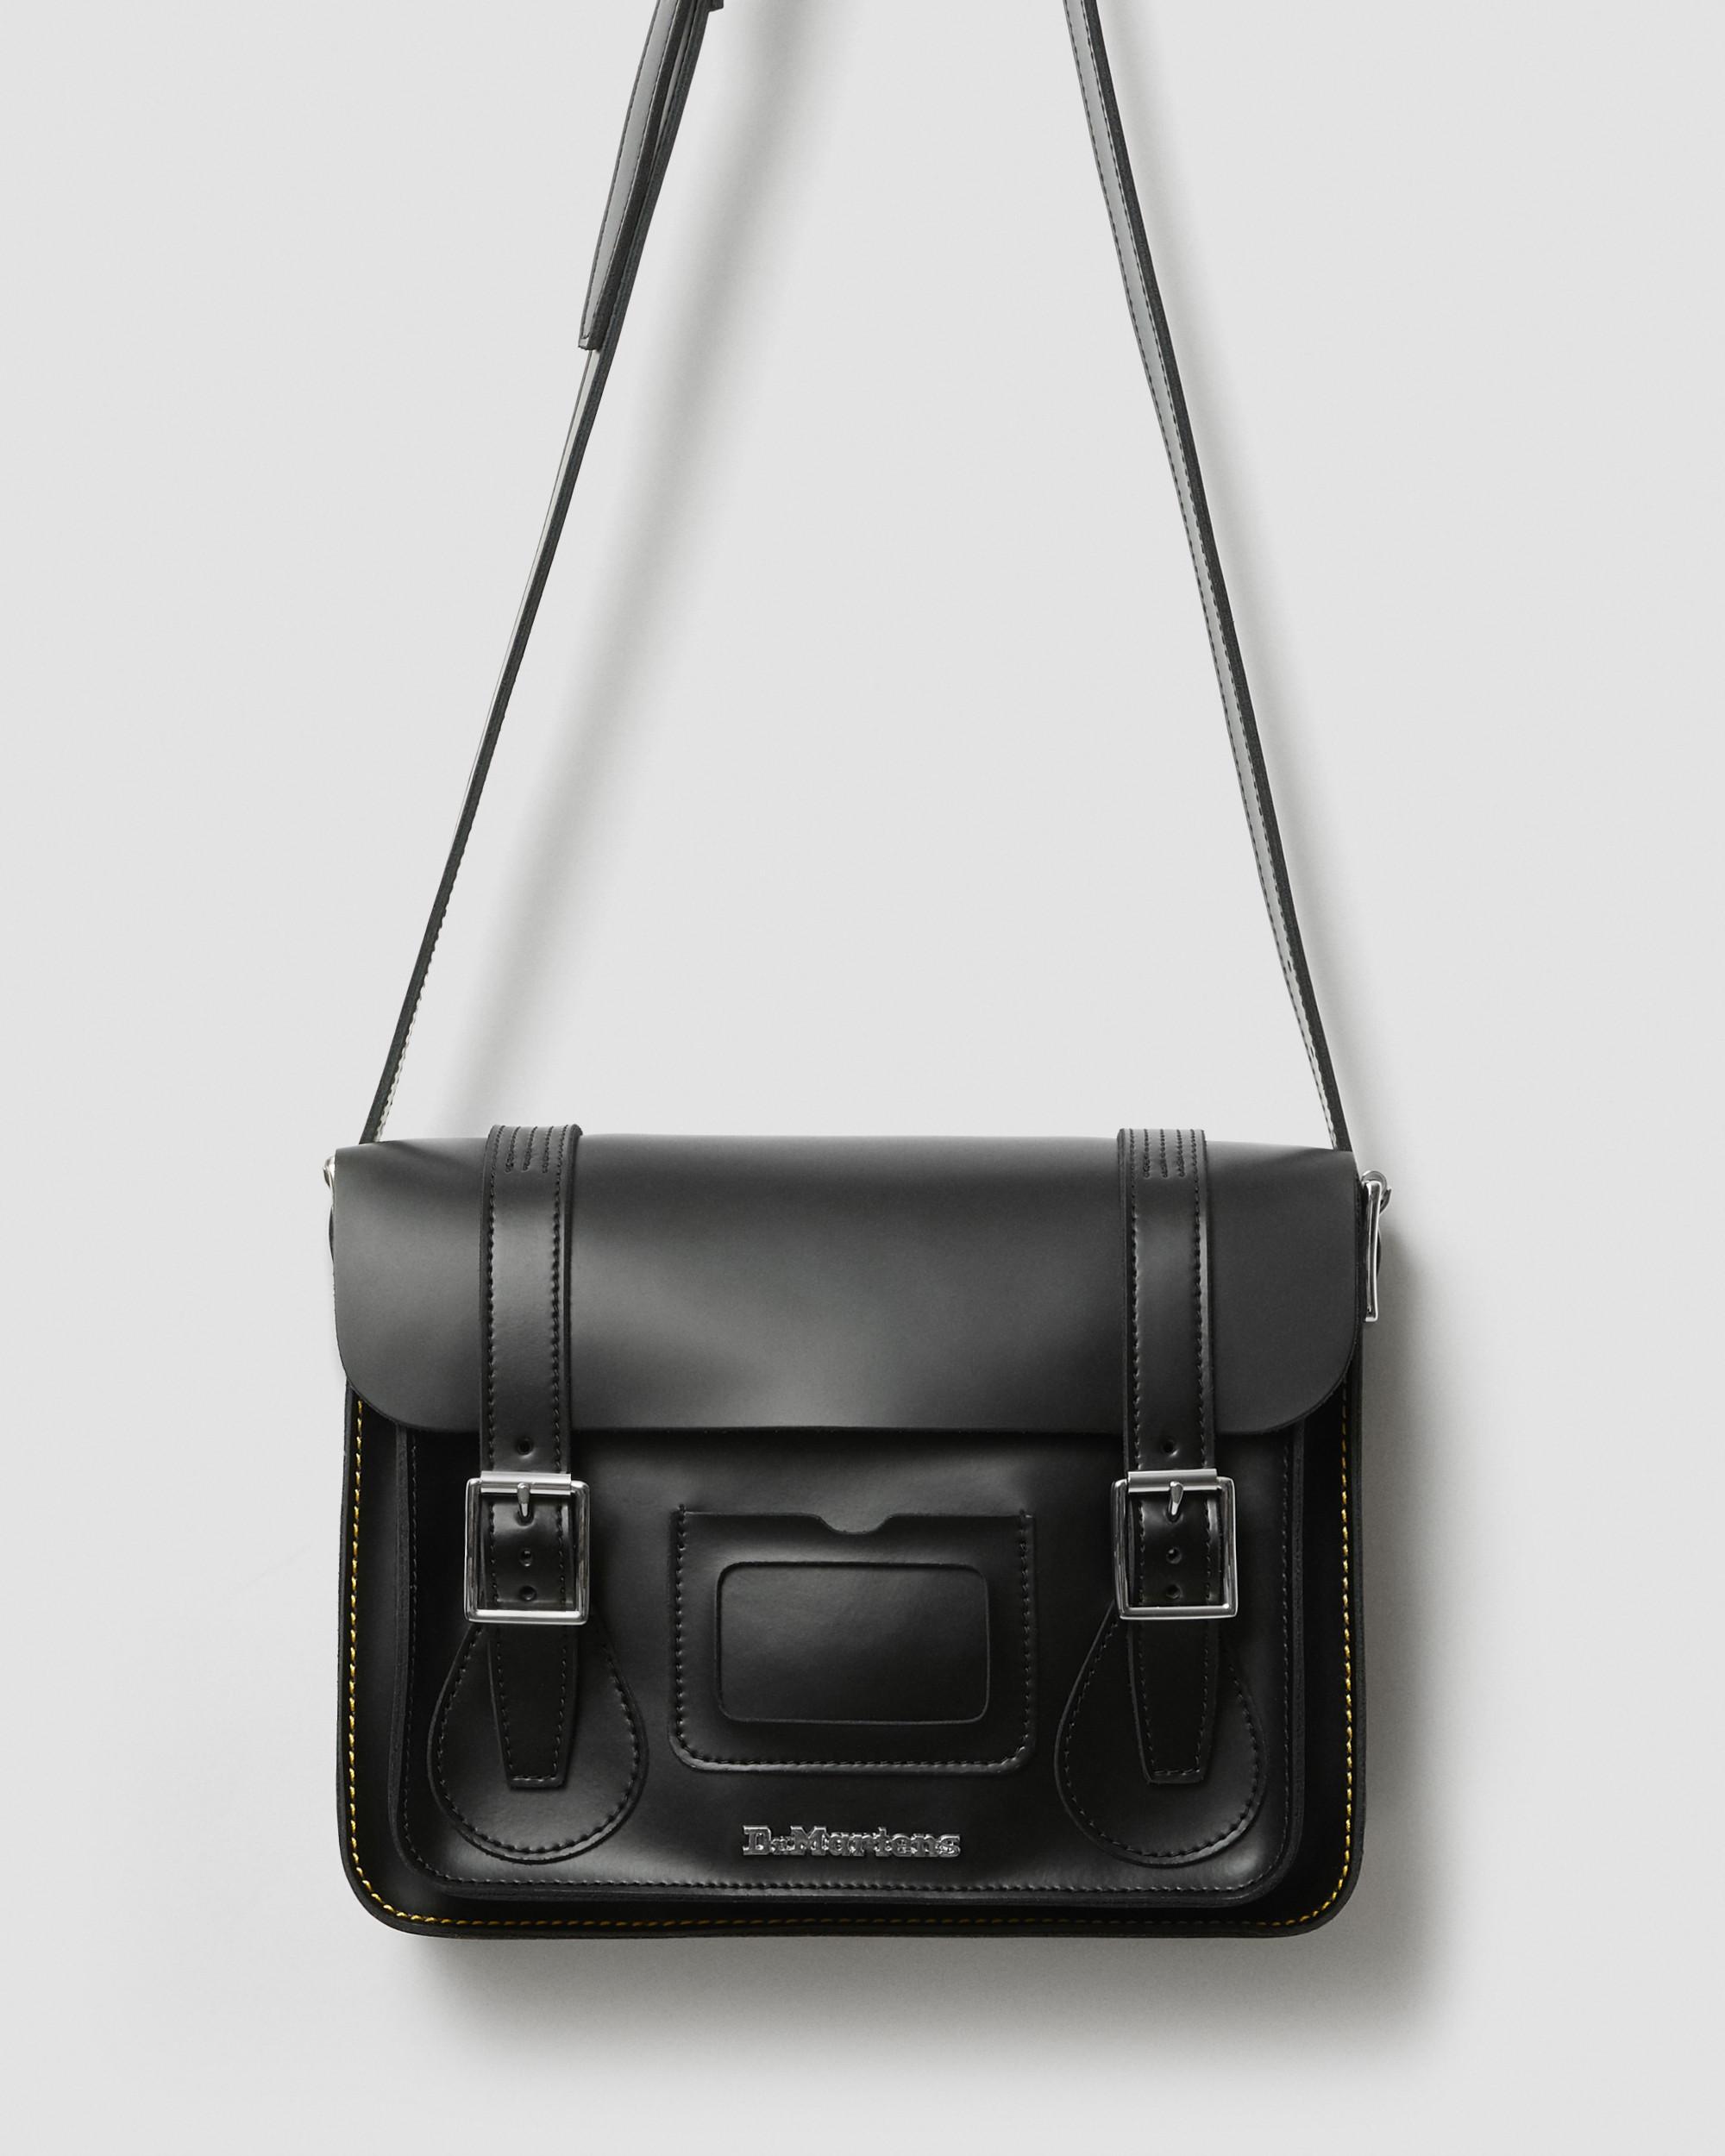 Buy > dr martens 11 inch leather satchel > in stock